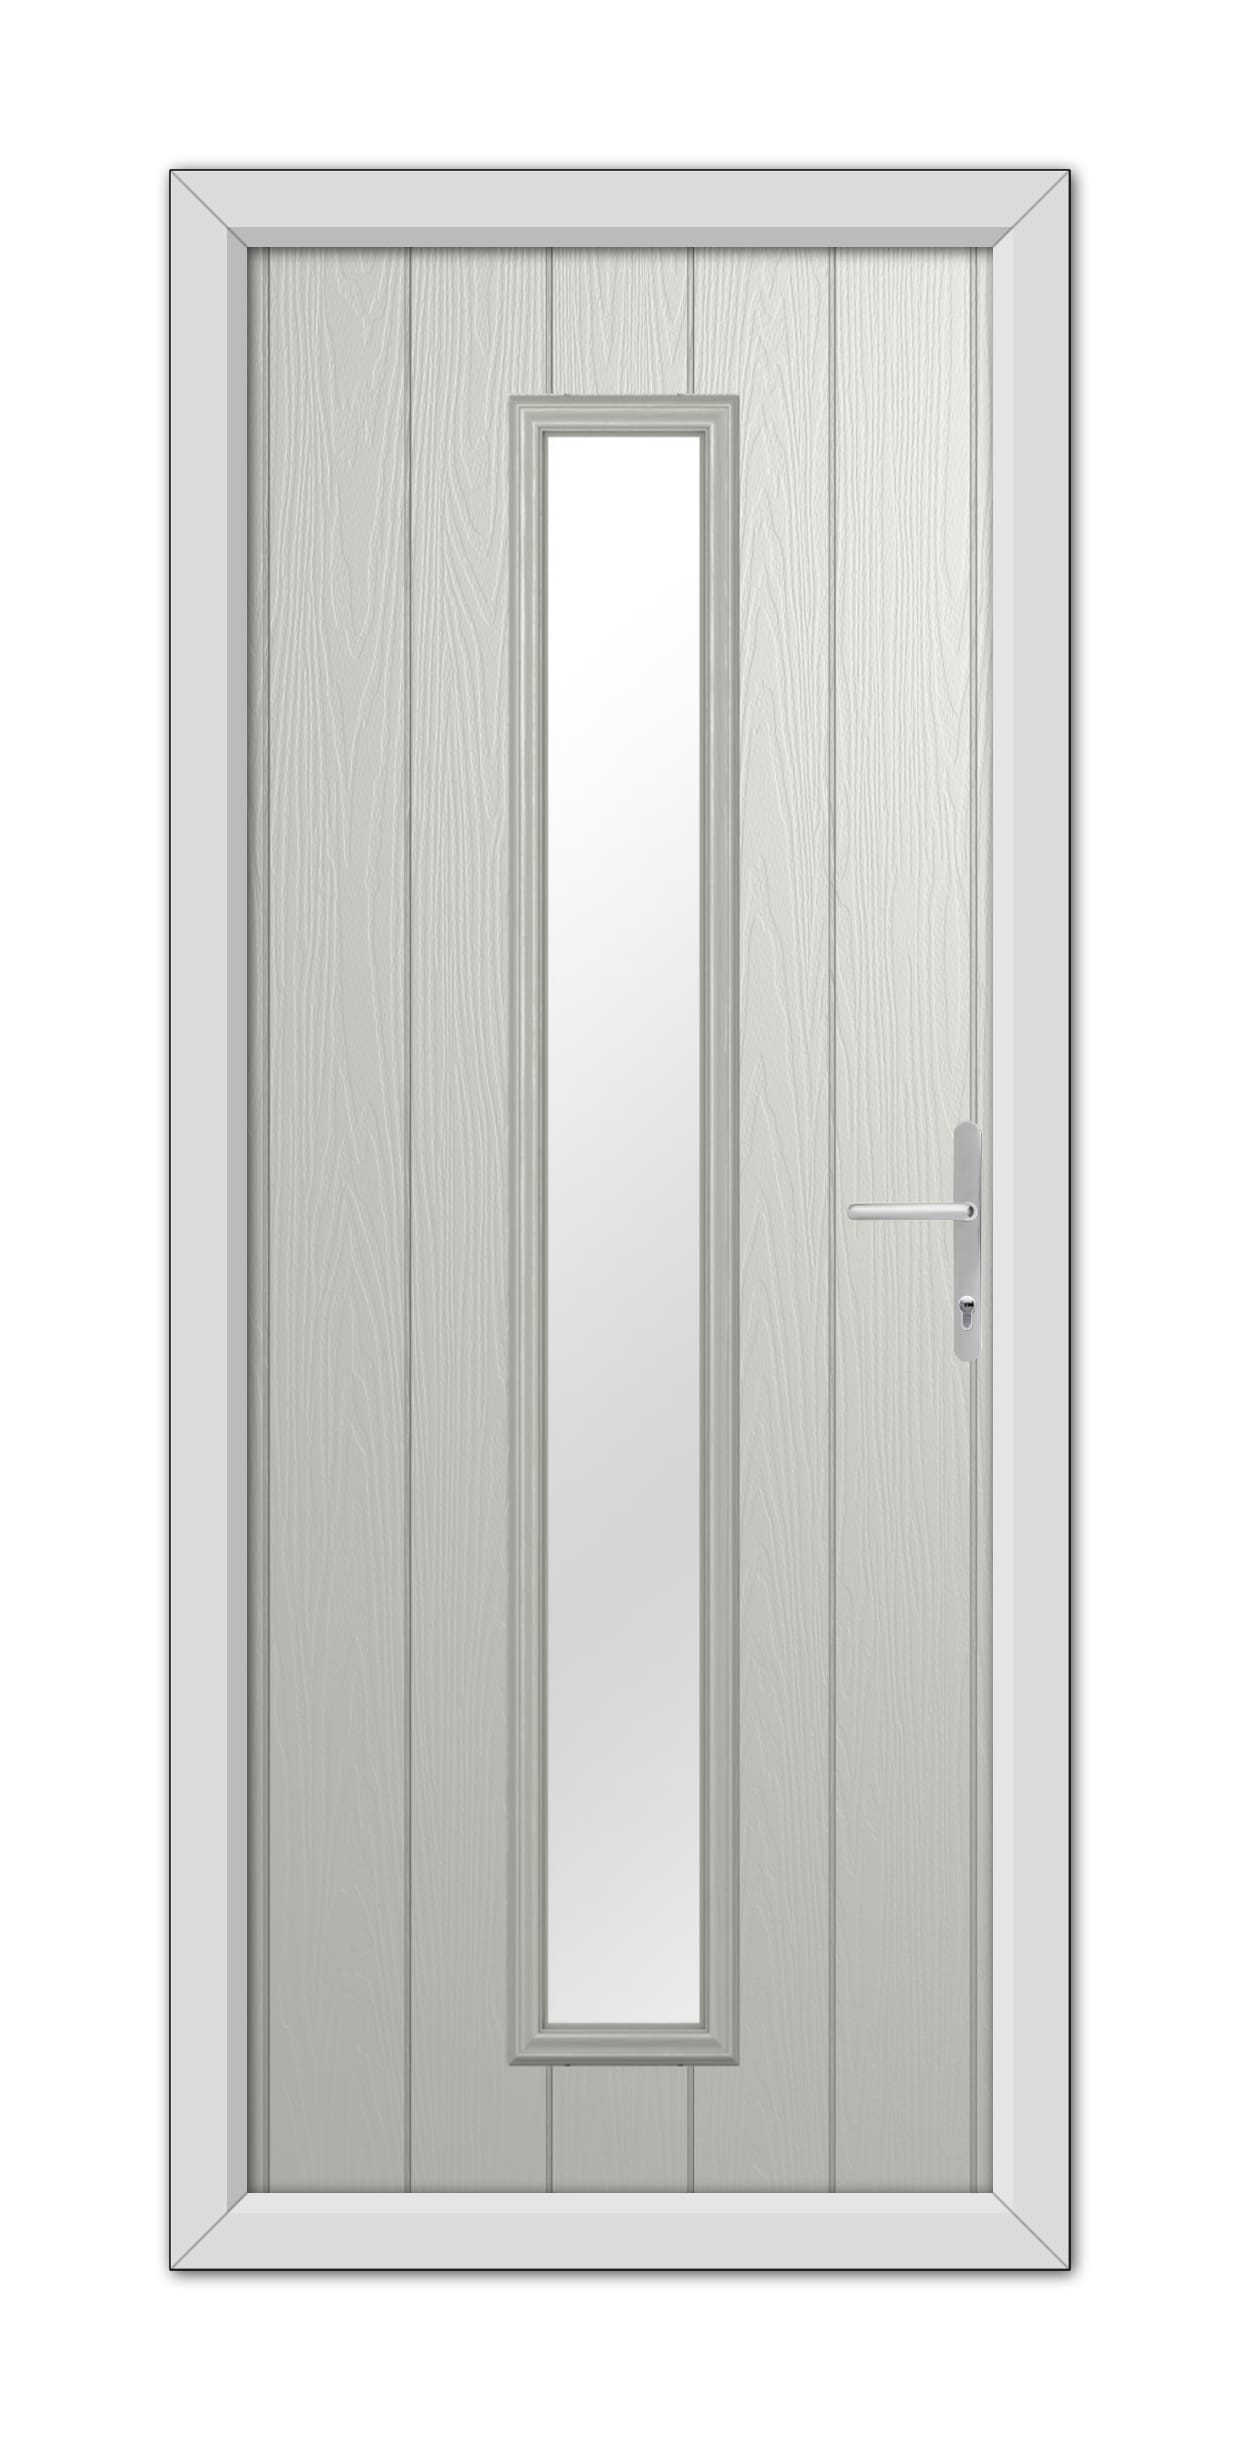 A modern Agate Grey Rutland Composite Door 48mm Timber Core with a long vertical glass panel and a metallic handle, set within a simple frame.